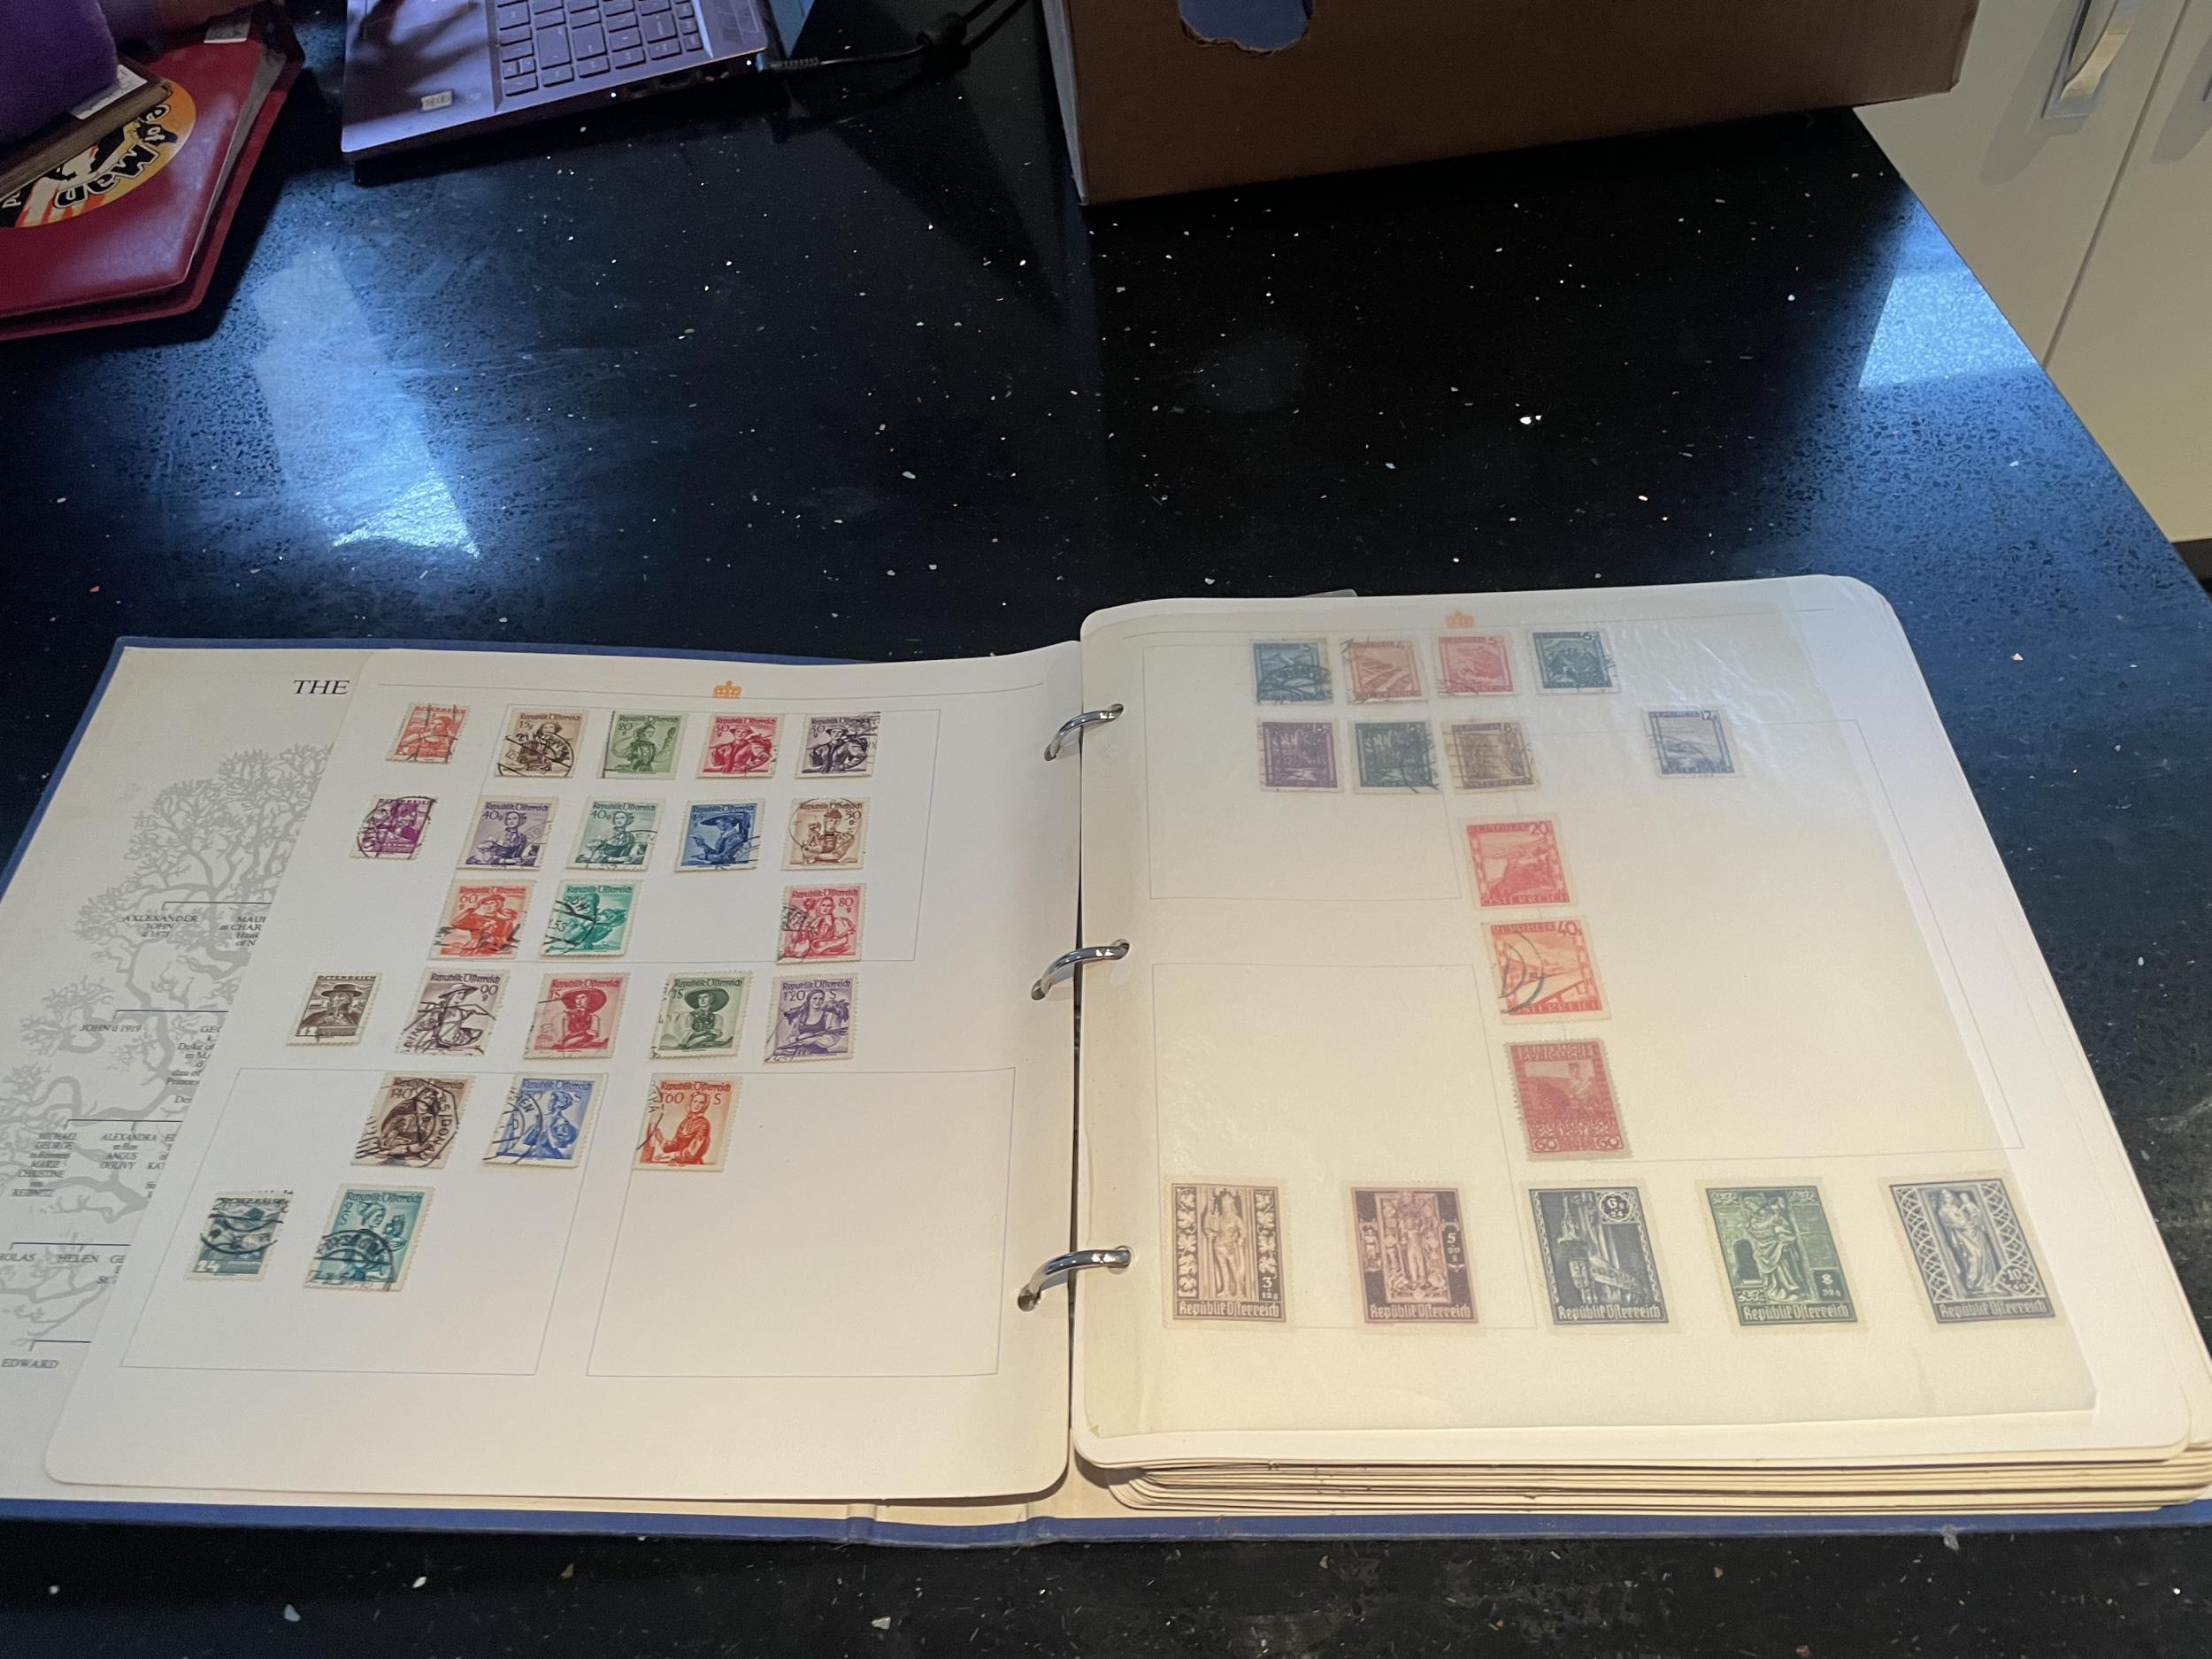 THE ROYAL FAMILY STAMP ALBUM OF WORLD STAMPS - HUNGARY, CUBA, POLAND ETC - Image 3 of 7